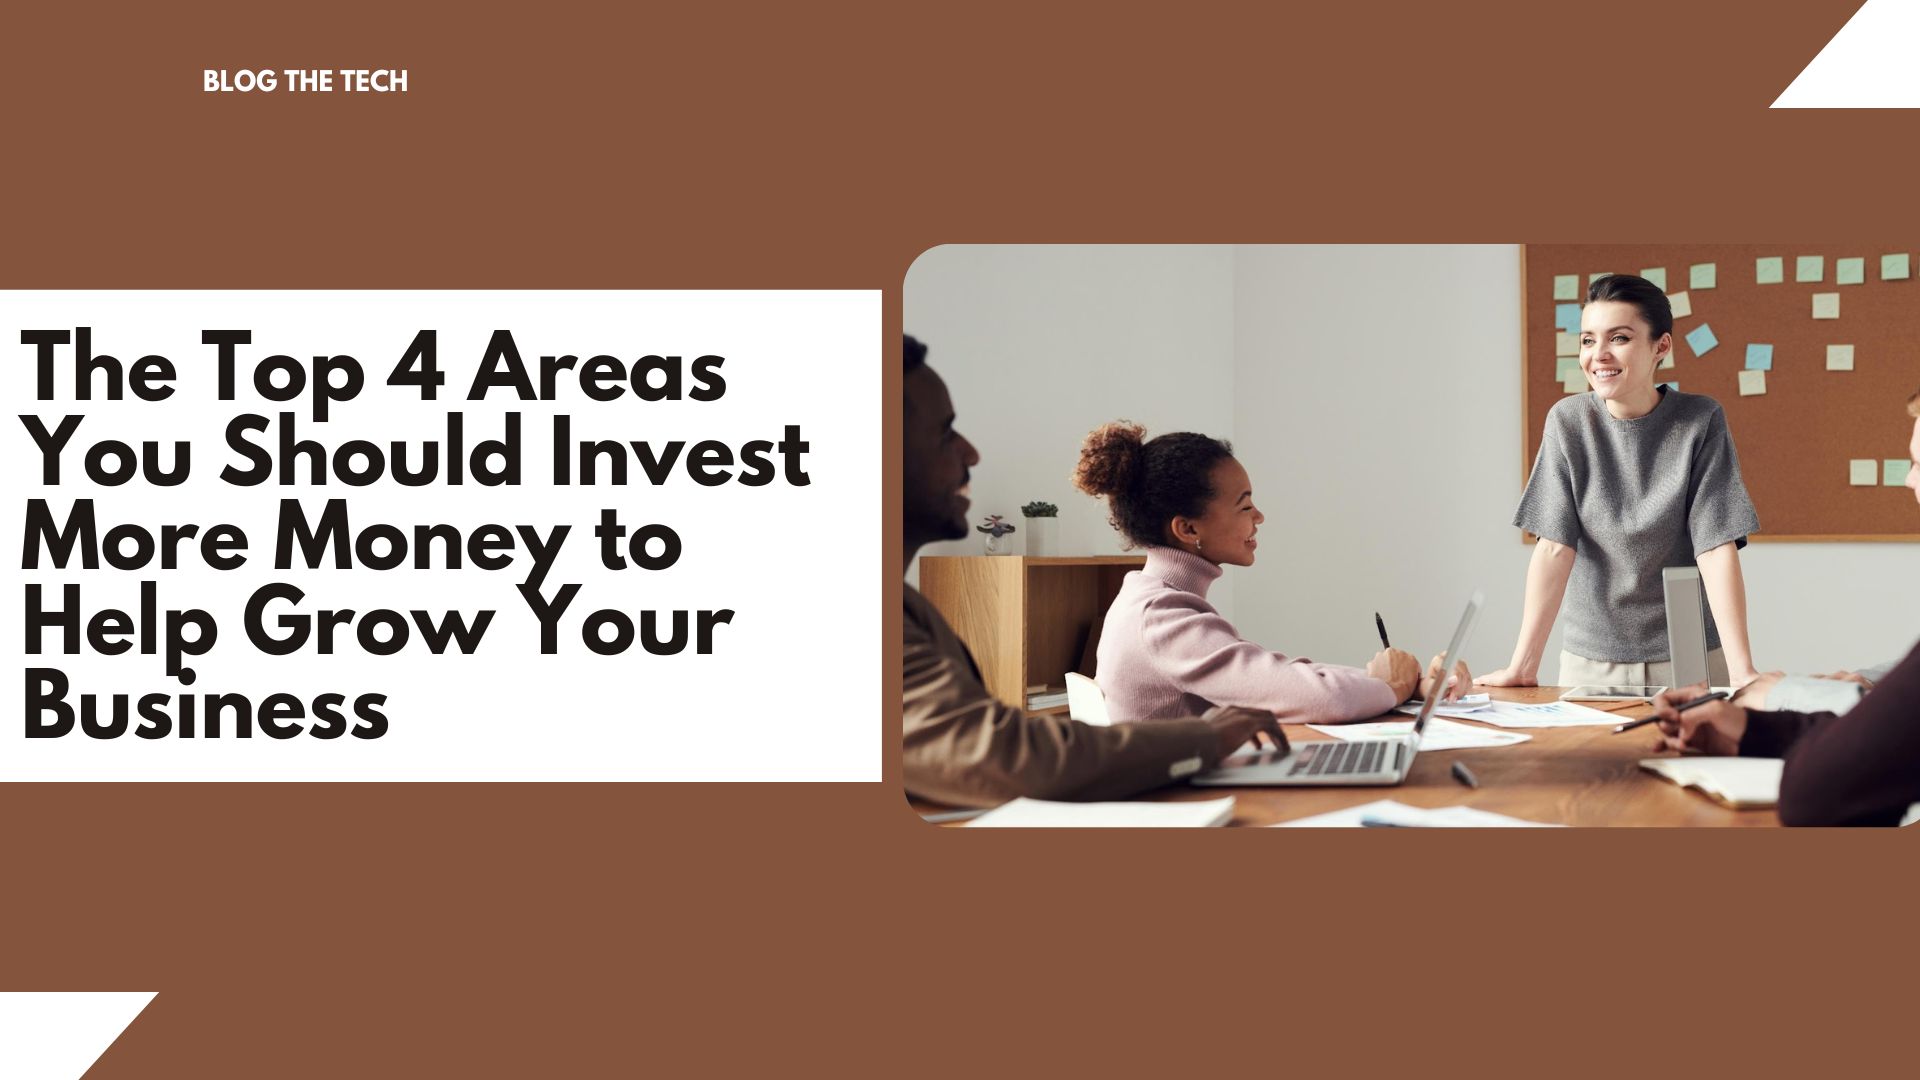 The Top 4 Areas You Should Invest More Money to Help Grow Your Business